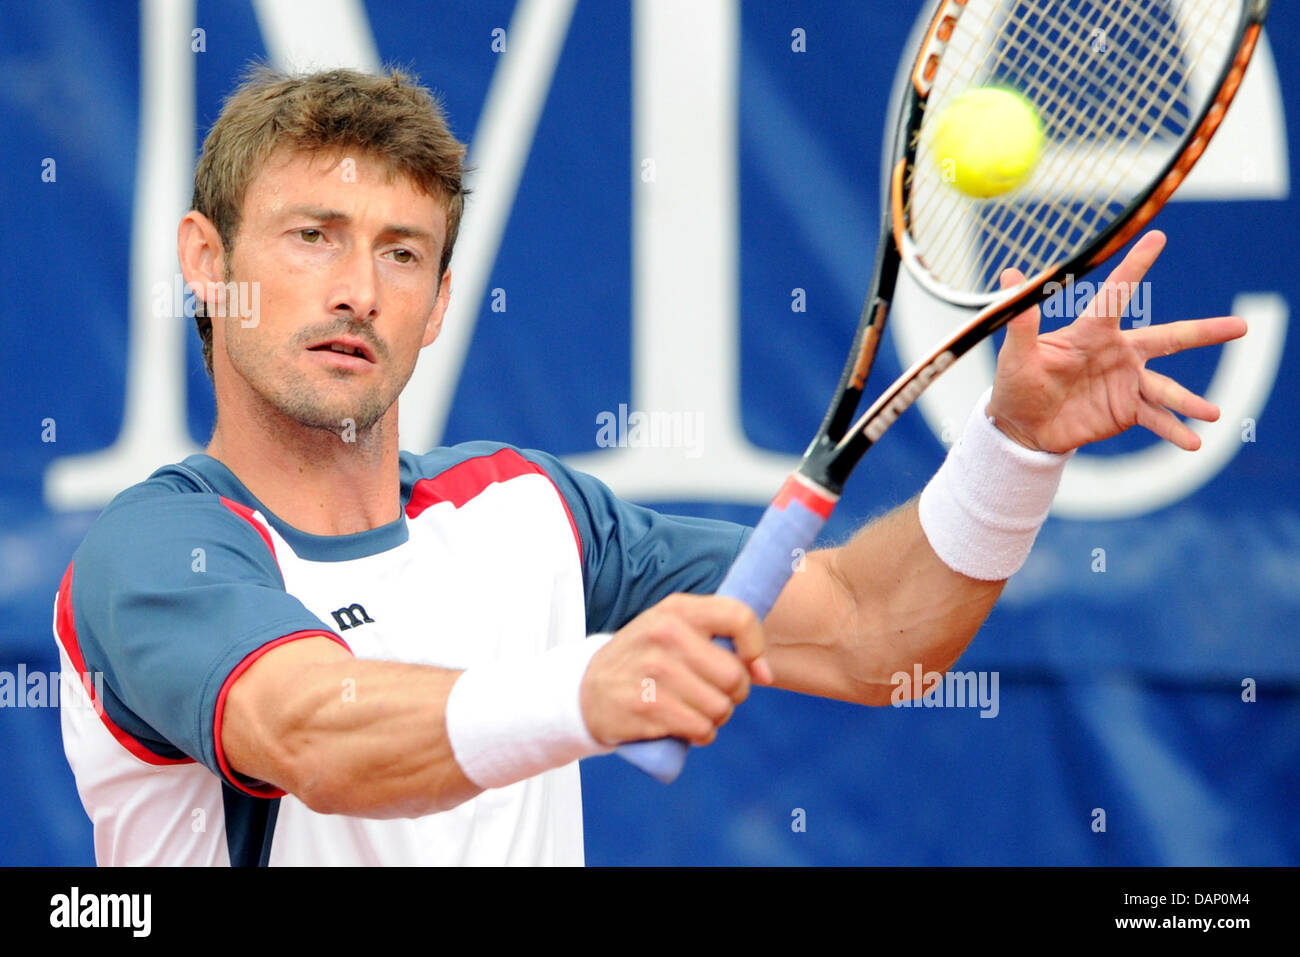 Spansih tennis player Juan Carlos Ferrero plays the ball during the ATP  tournament's final match against Spain's Pablo Andujar at Weissenhof in  Stuttgart, Germany, 17 July 2011. Photo: Bernd Weissbrod Stock Photo - Alamy